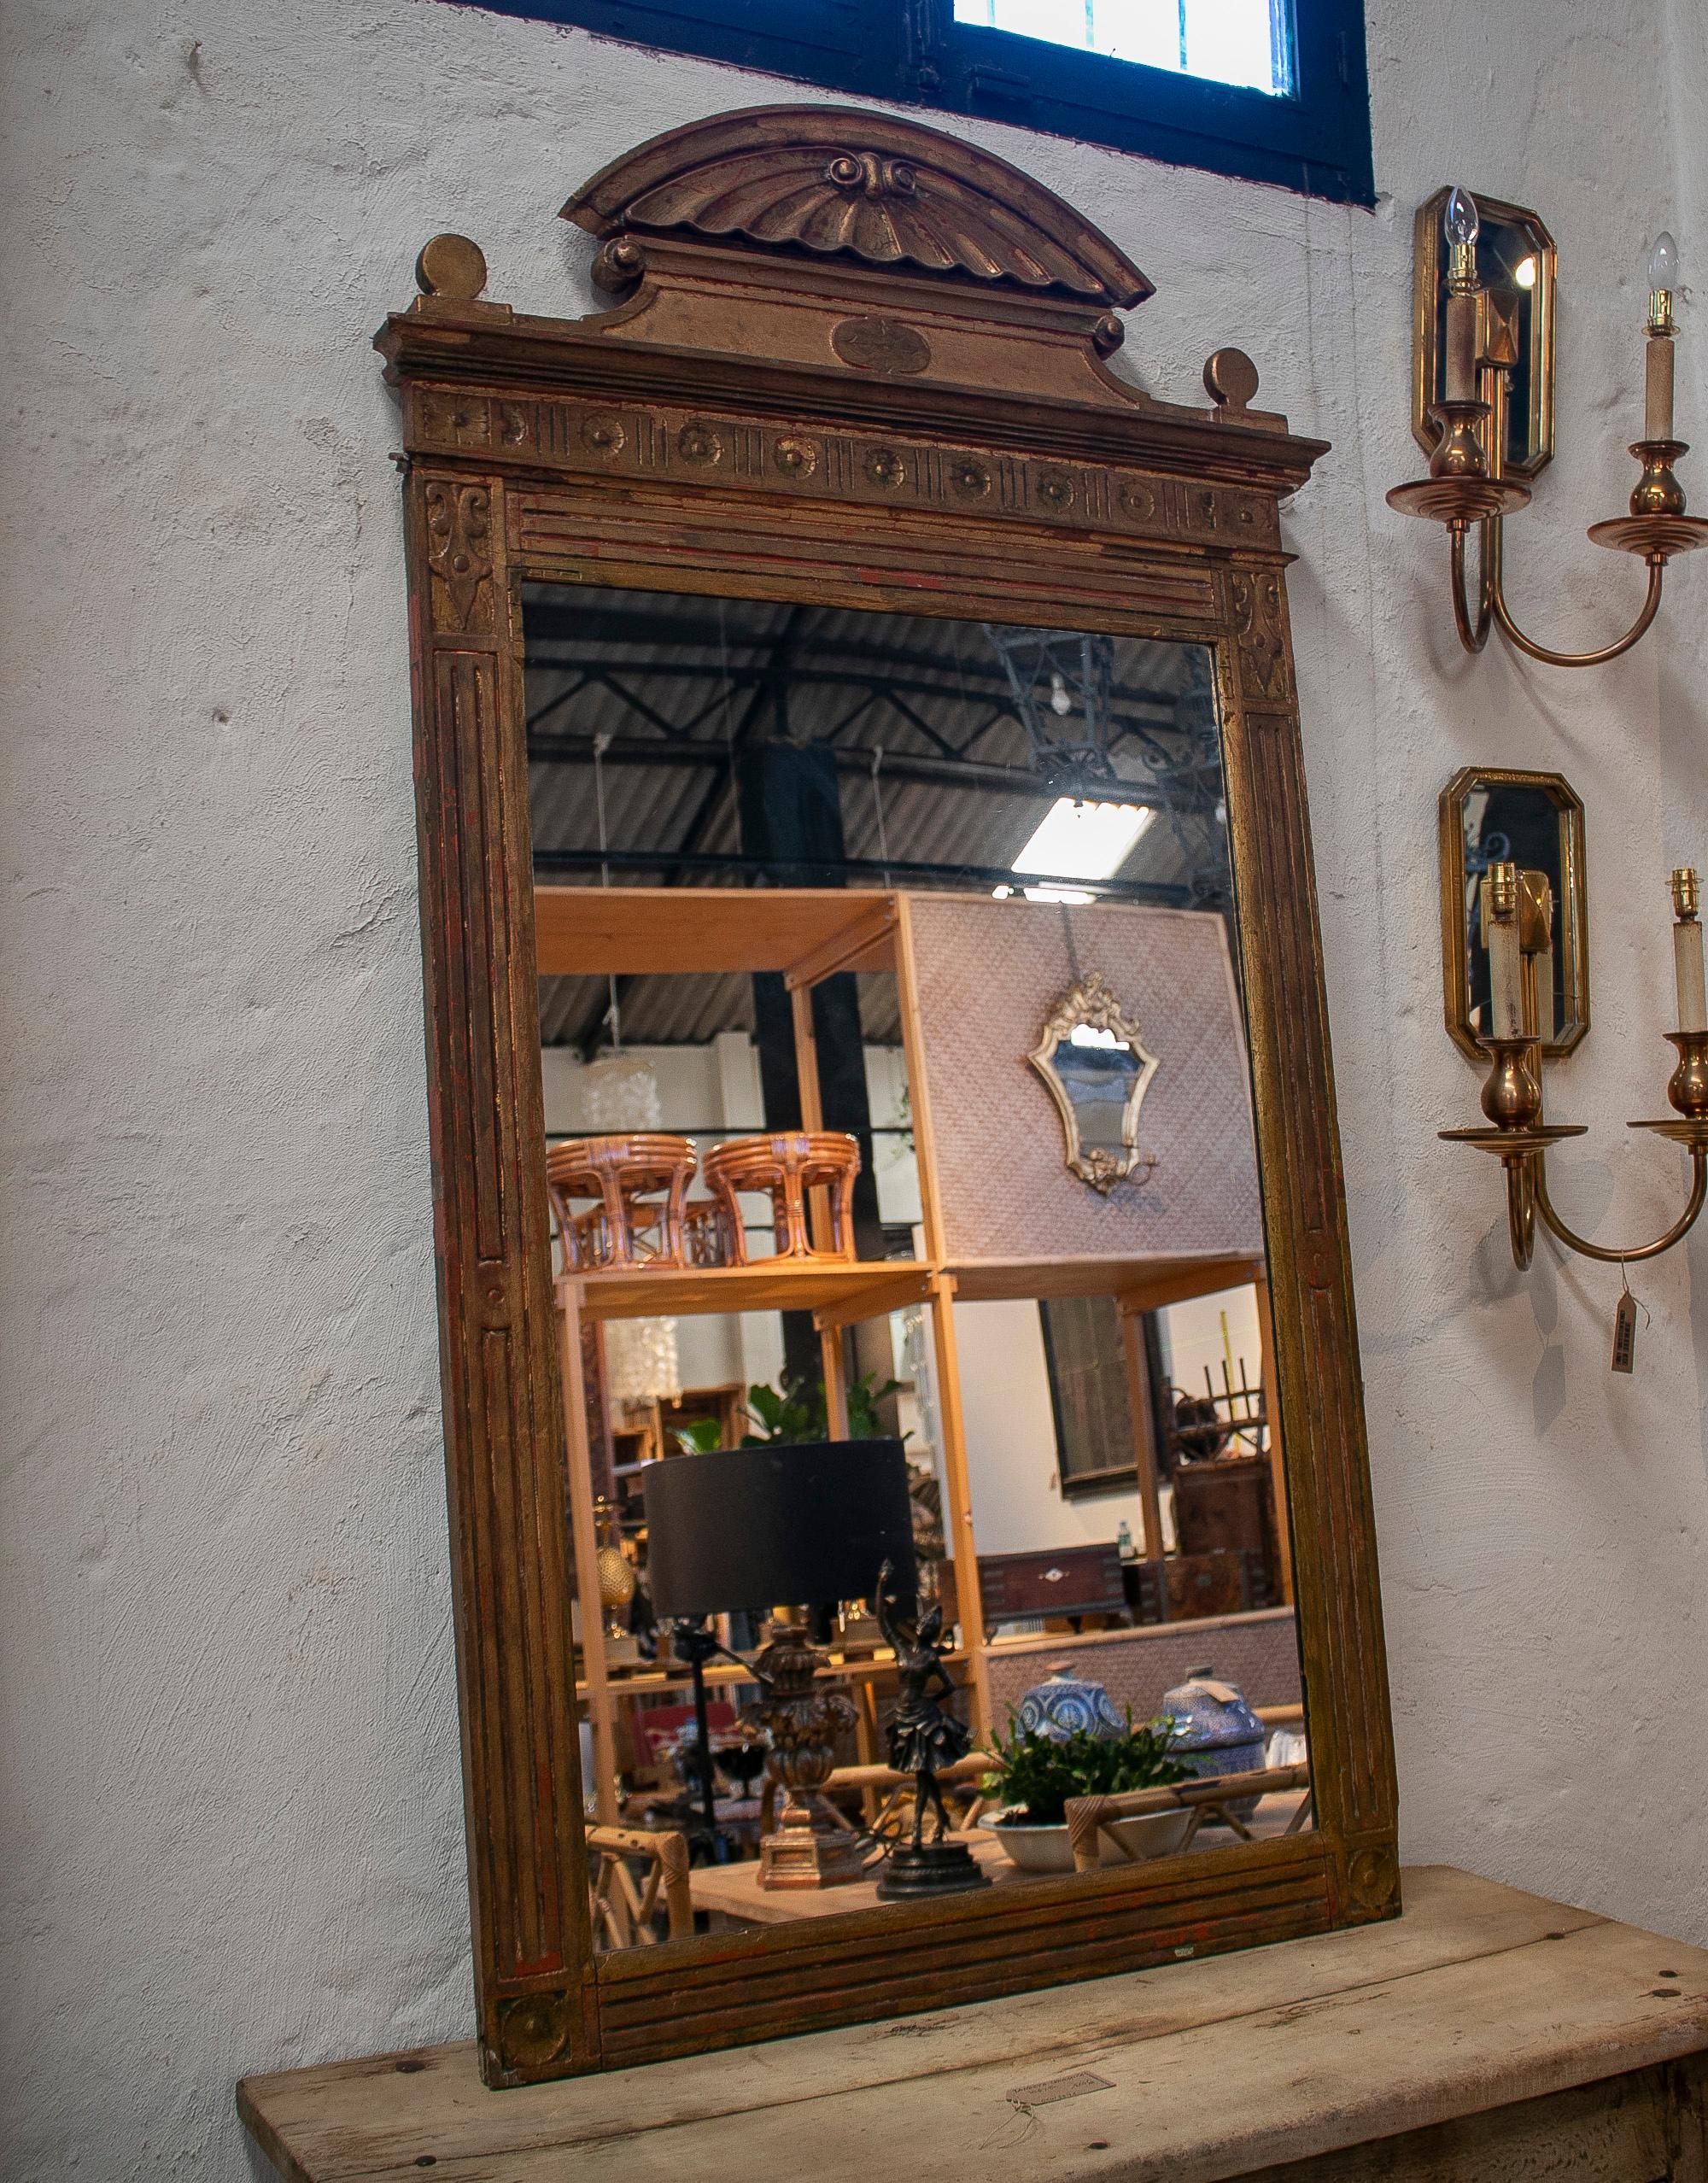 19th century Spanish giltwood mirror with conch atop.